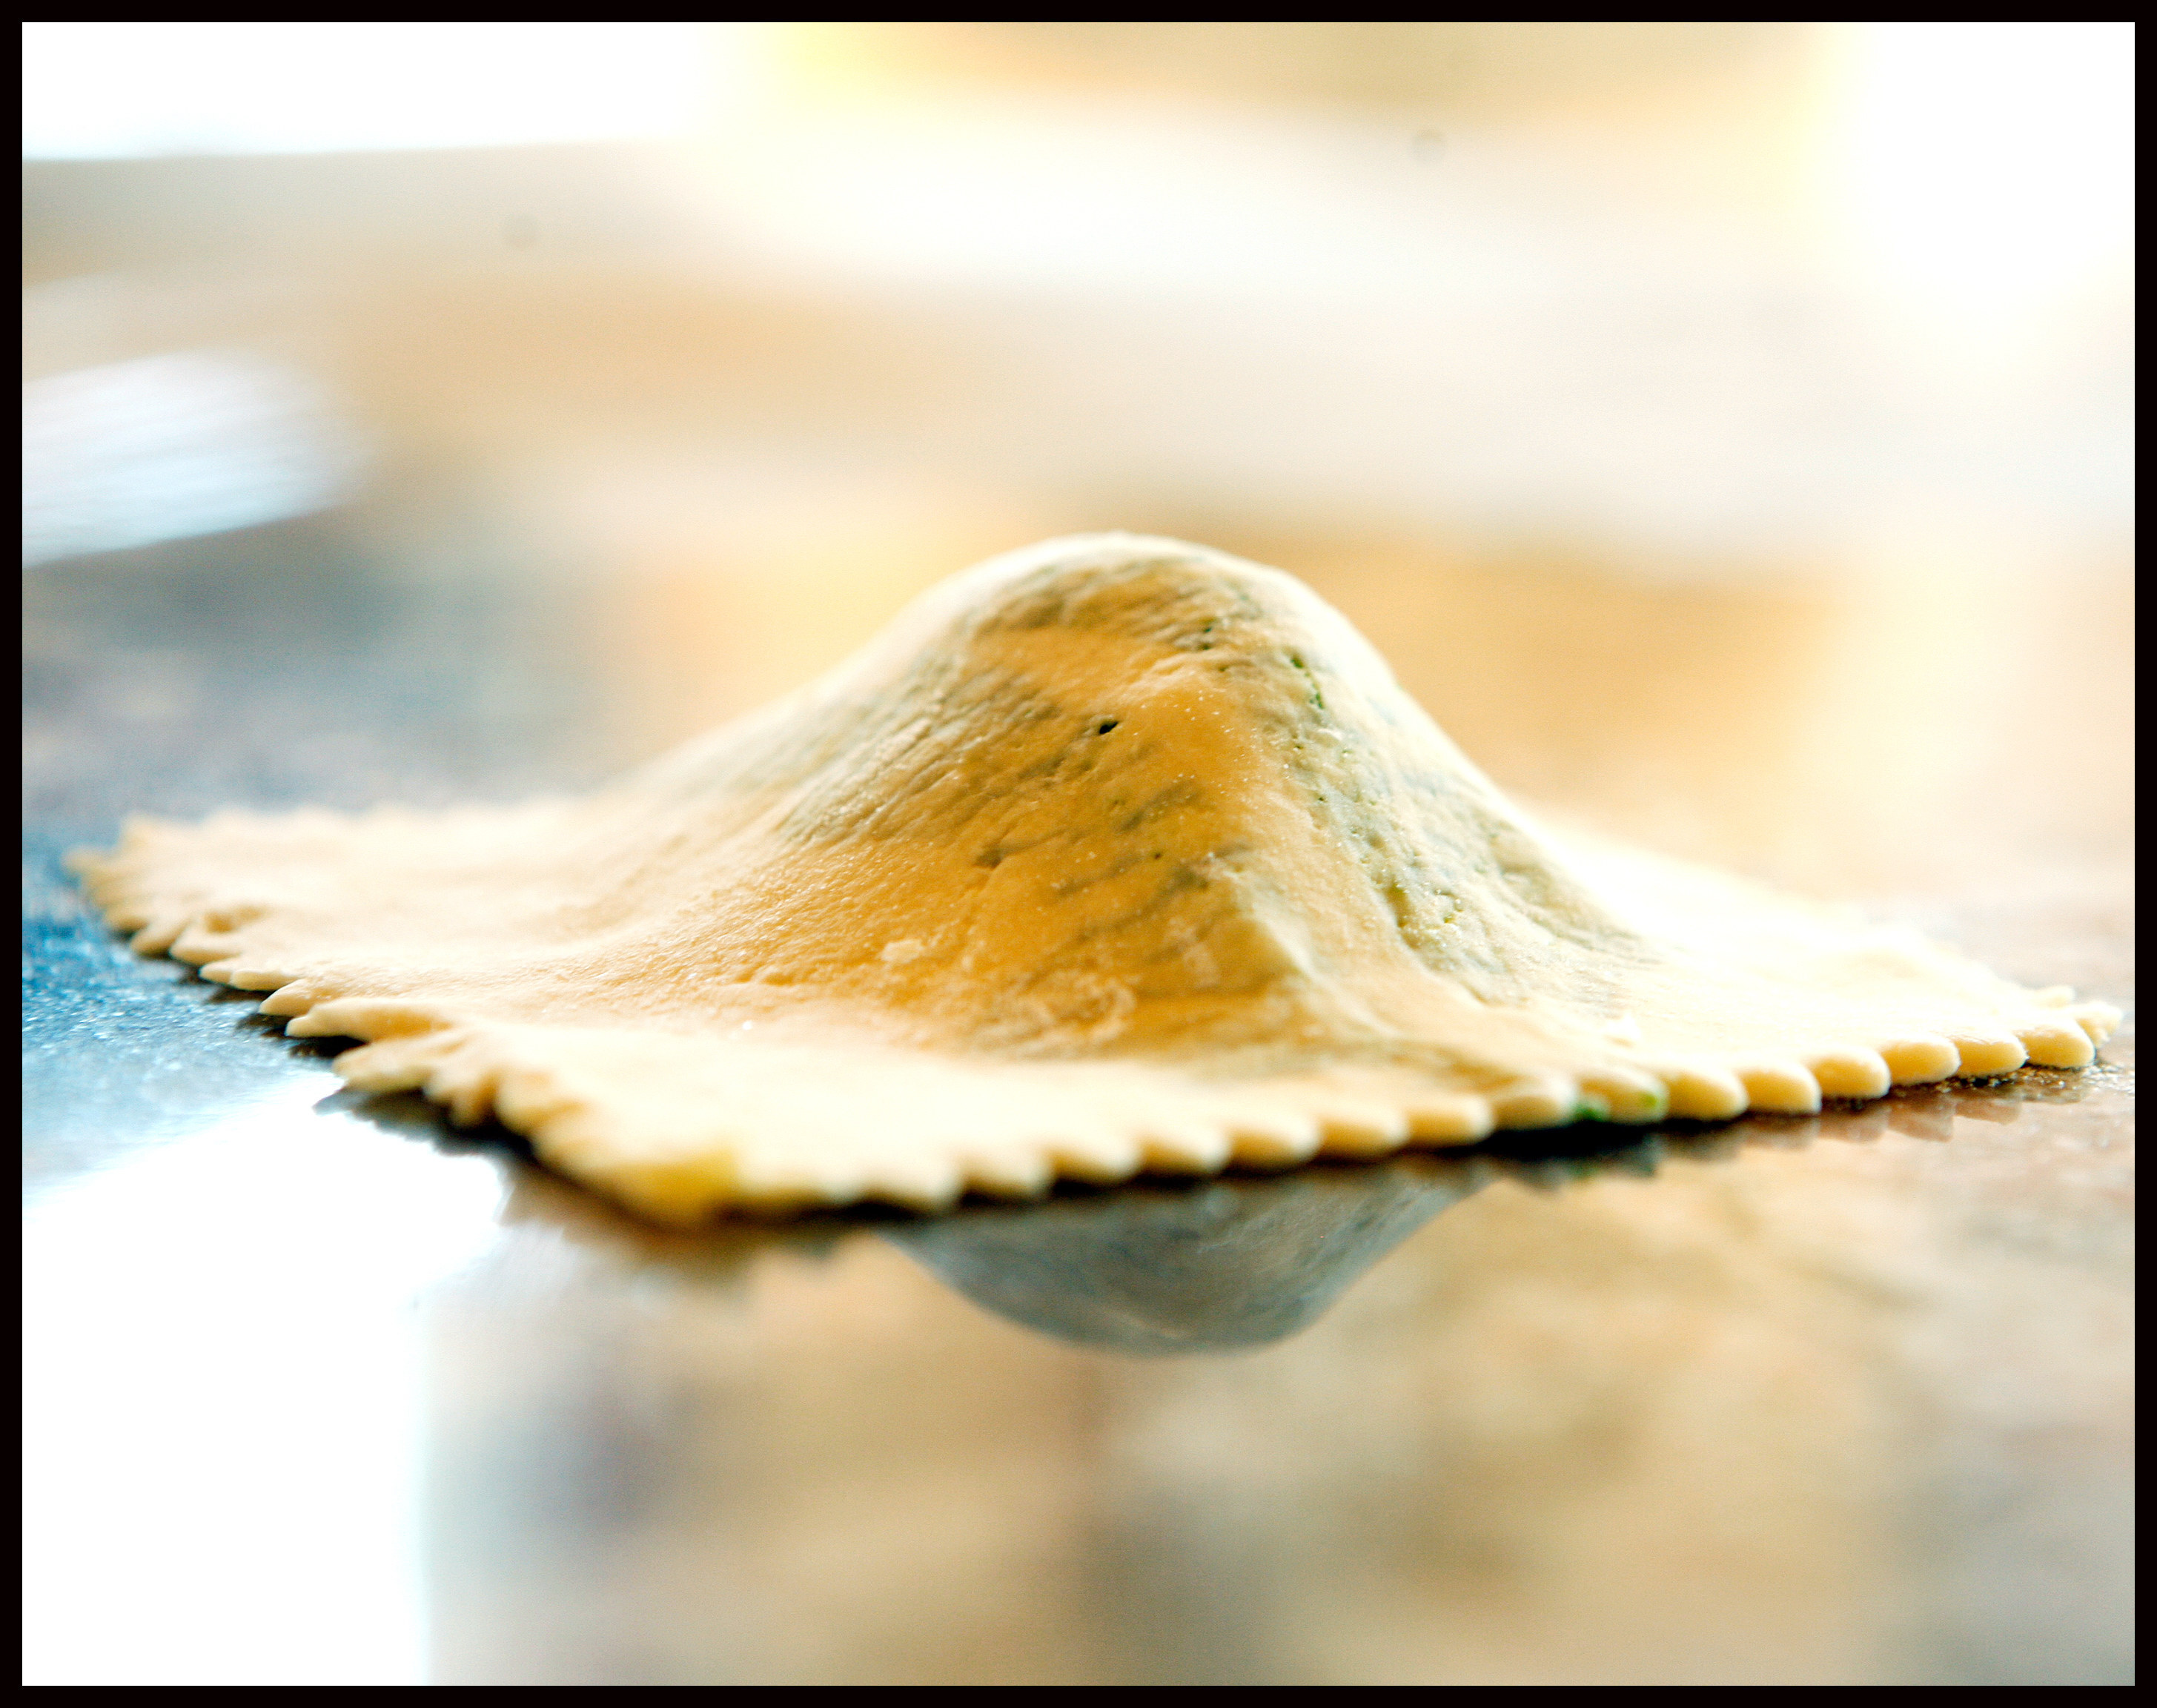 A ravioli  - one of the many forms of dumpling found in the world today. Their roots are a matter for debate. Photo: David Woo/Corbis via Getty Images